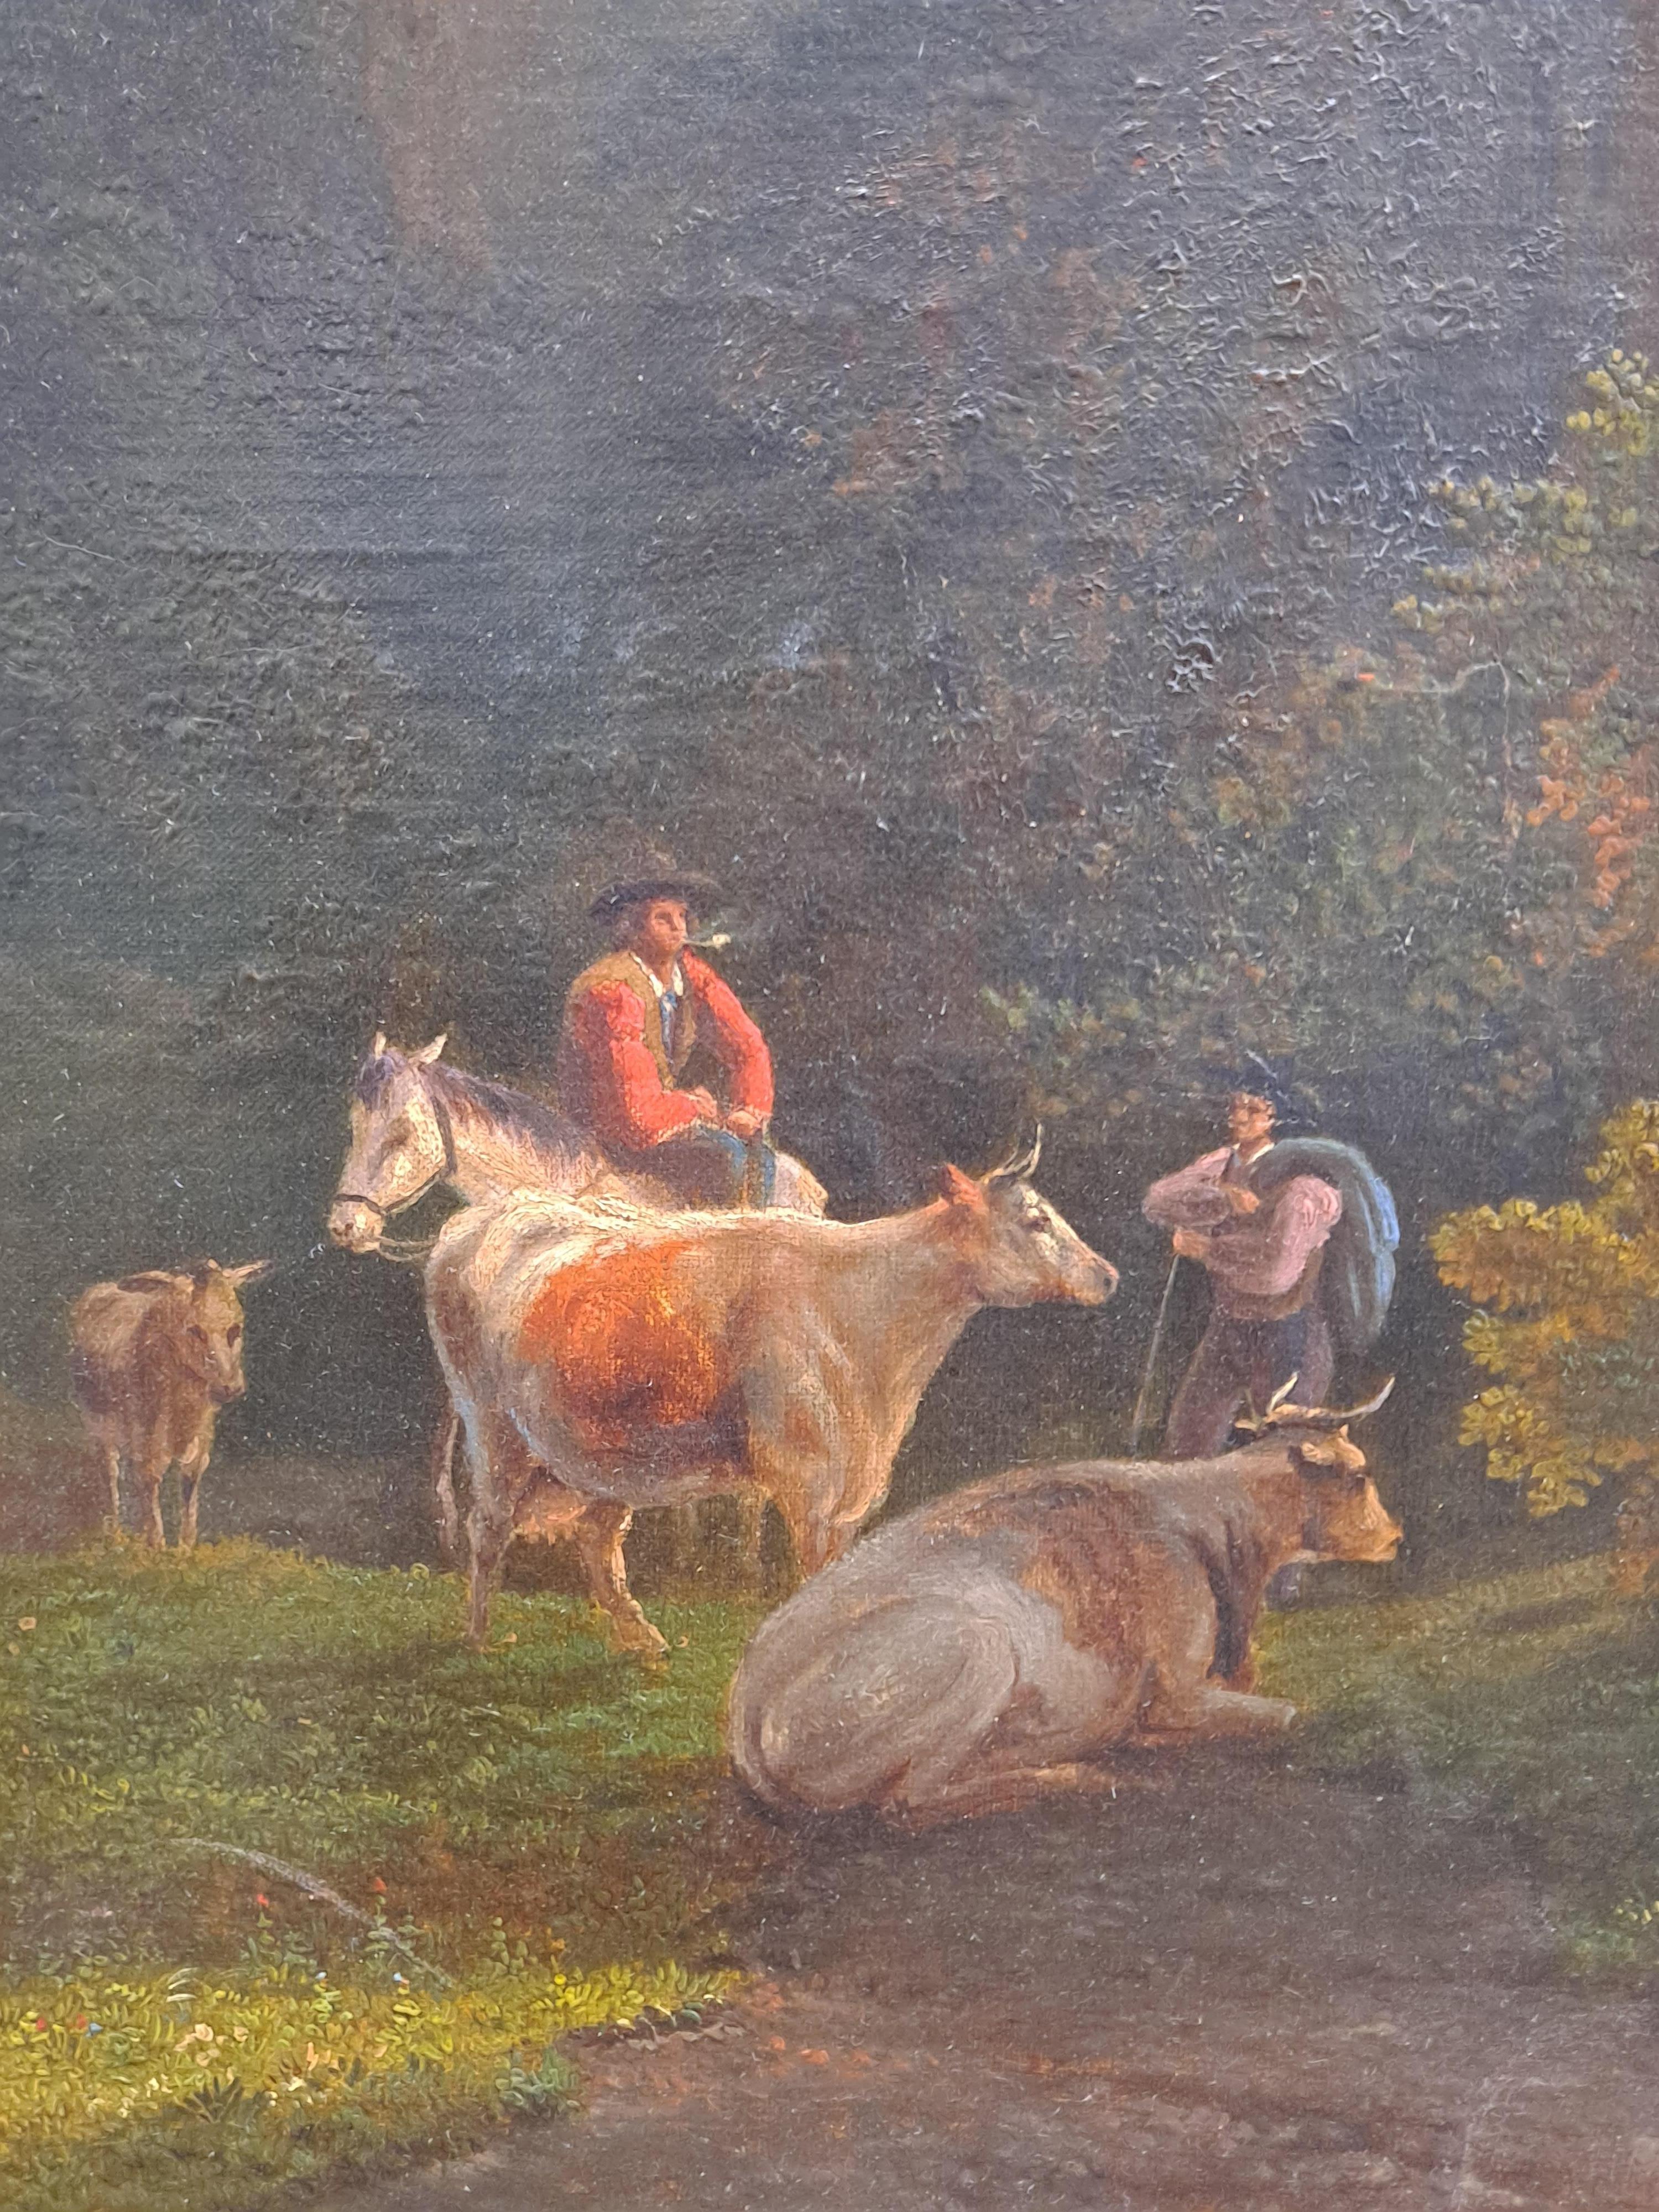 F Cesare Bimerman (1821-1890) Forest Landscape With Travelers and Cattle - Painting by F. Cesare Bimerman